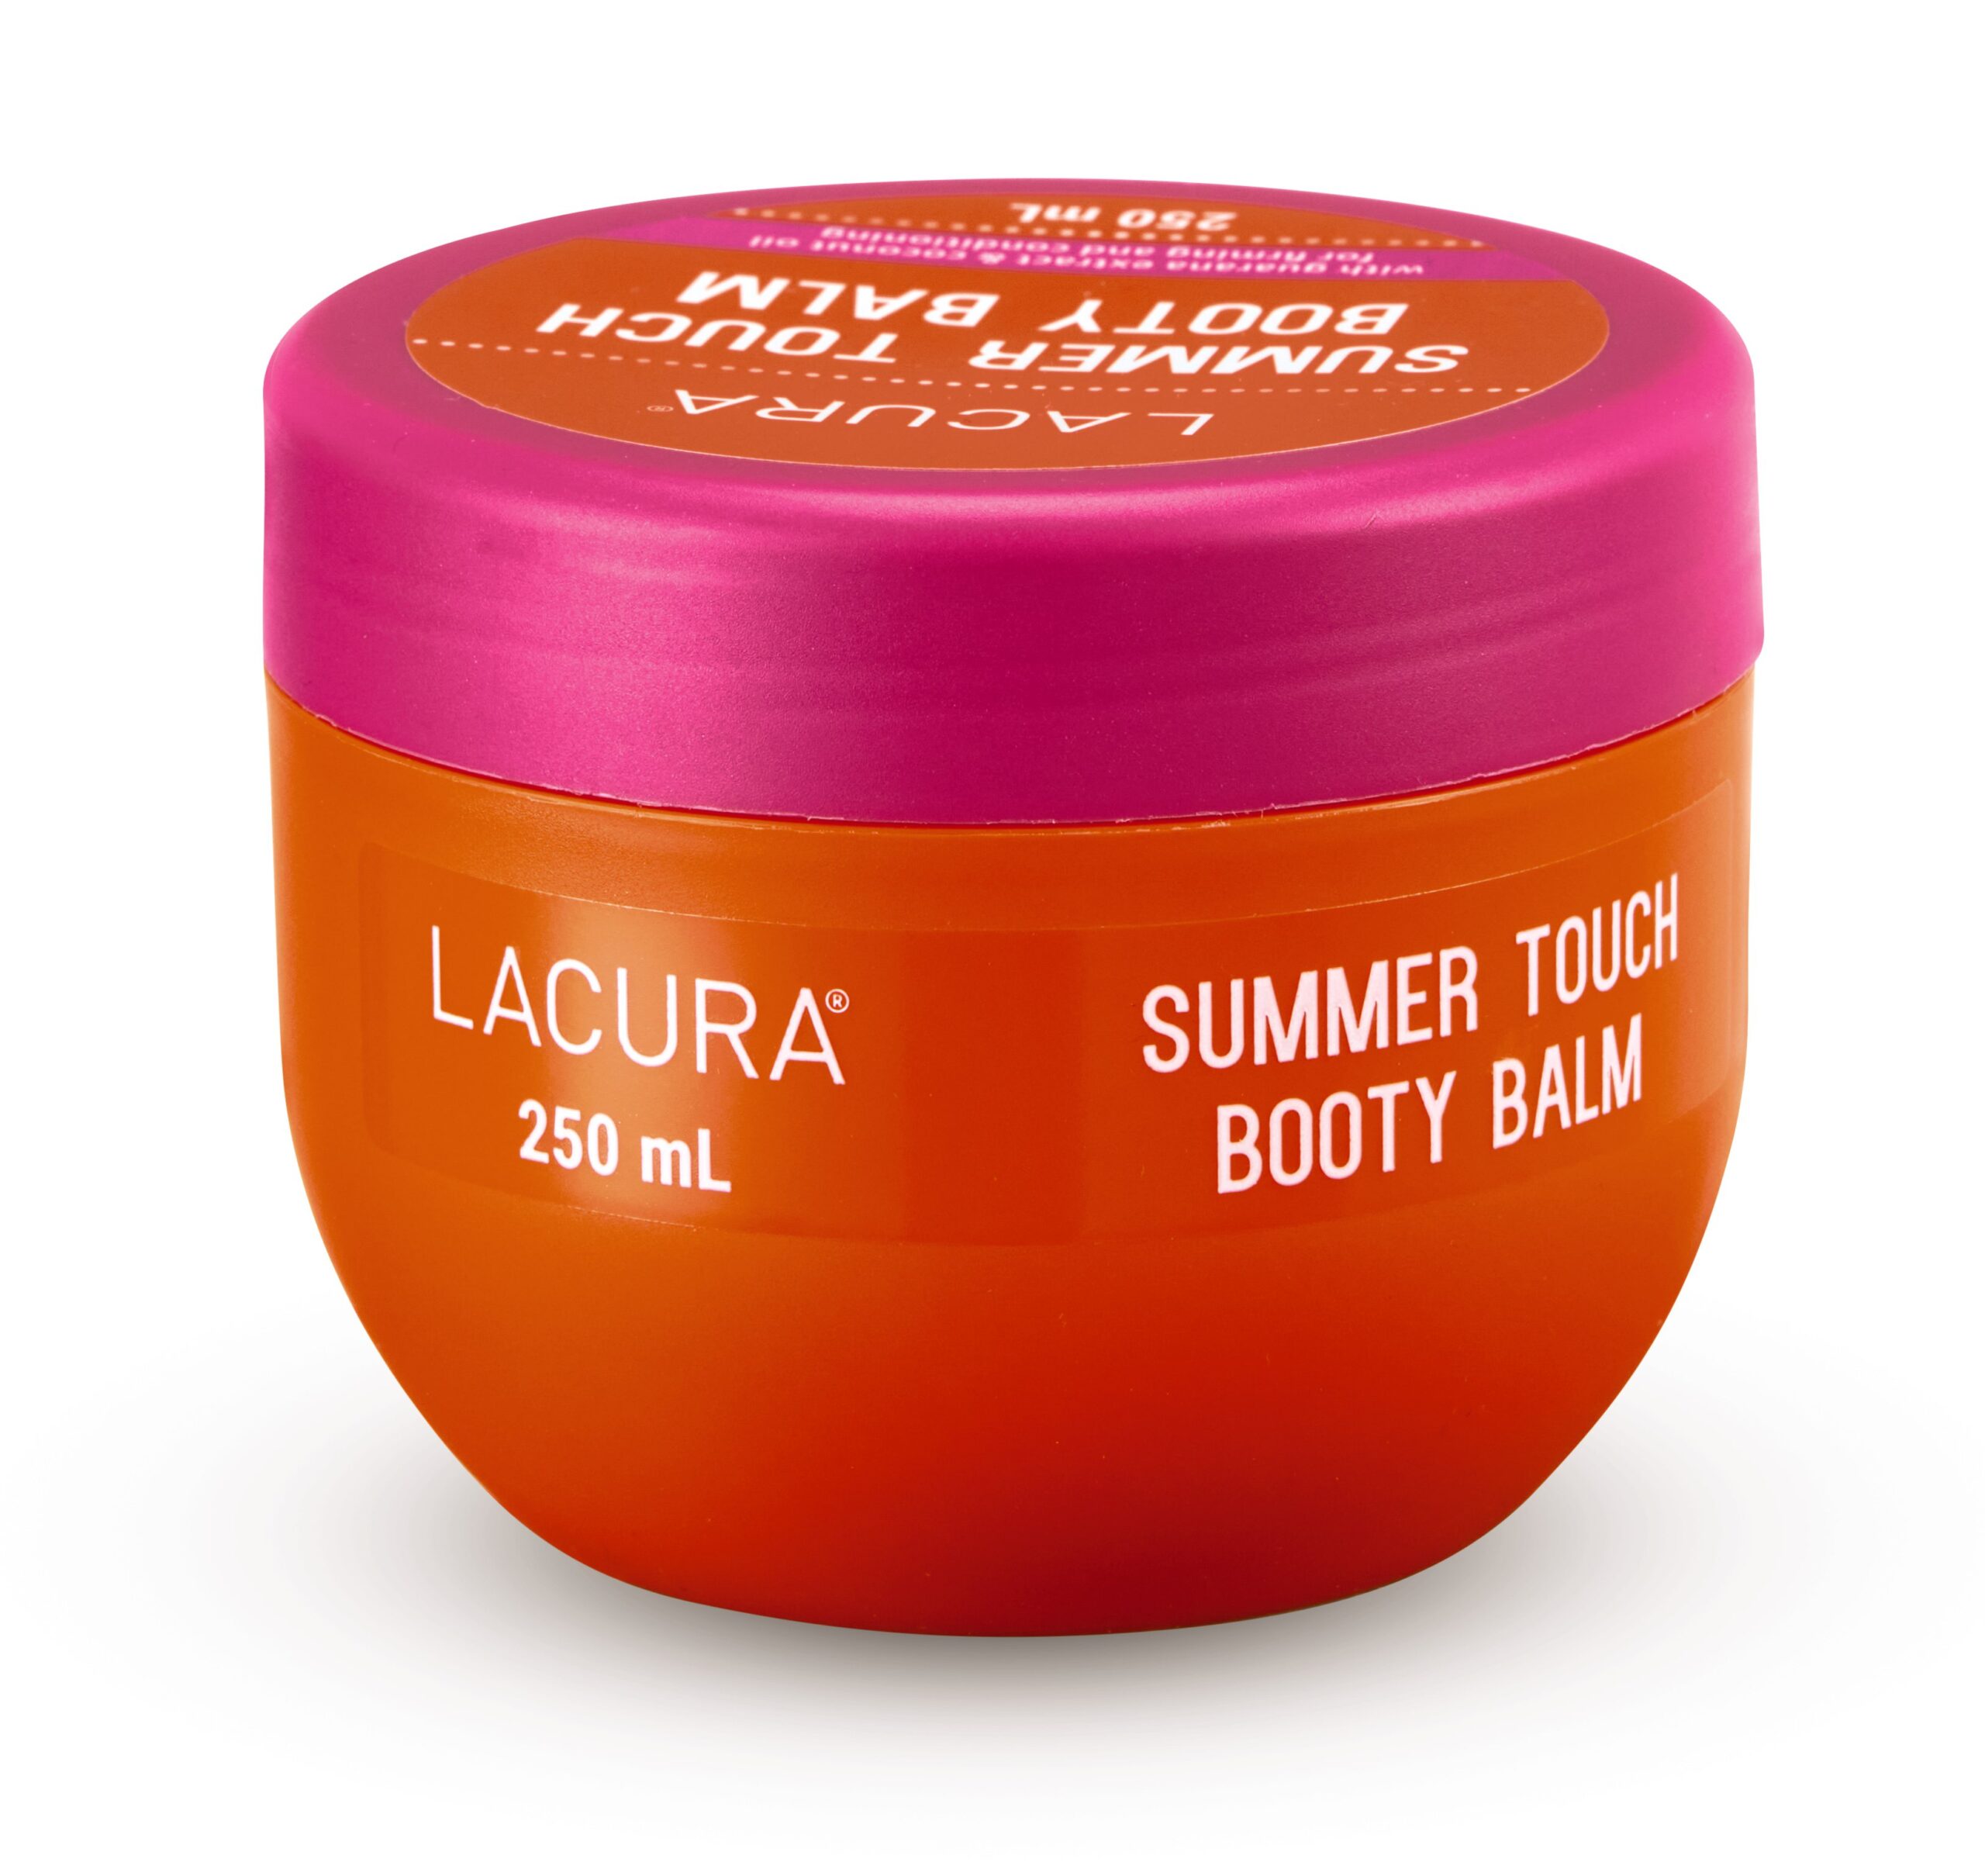 Lacura Summer Touch Booty Balm